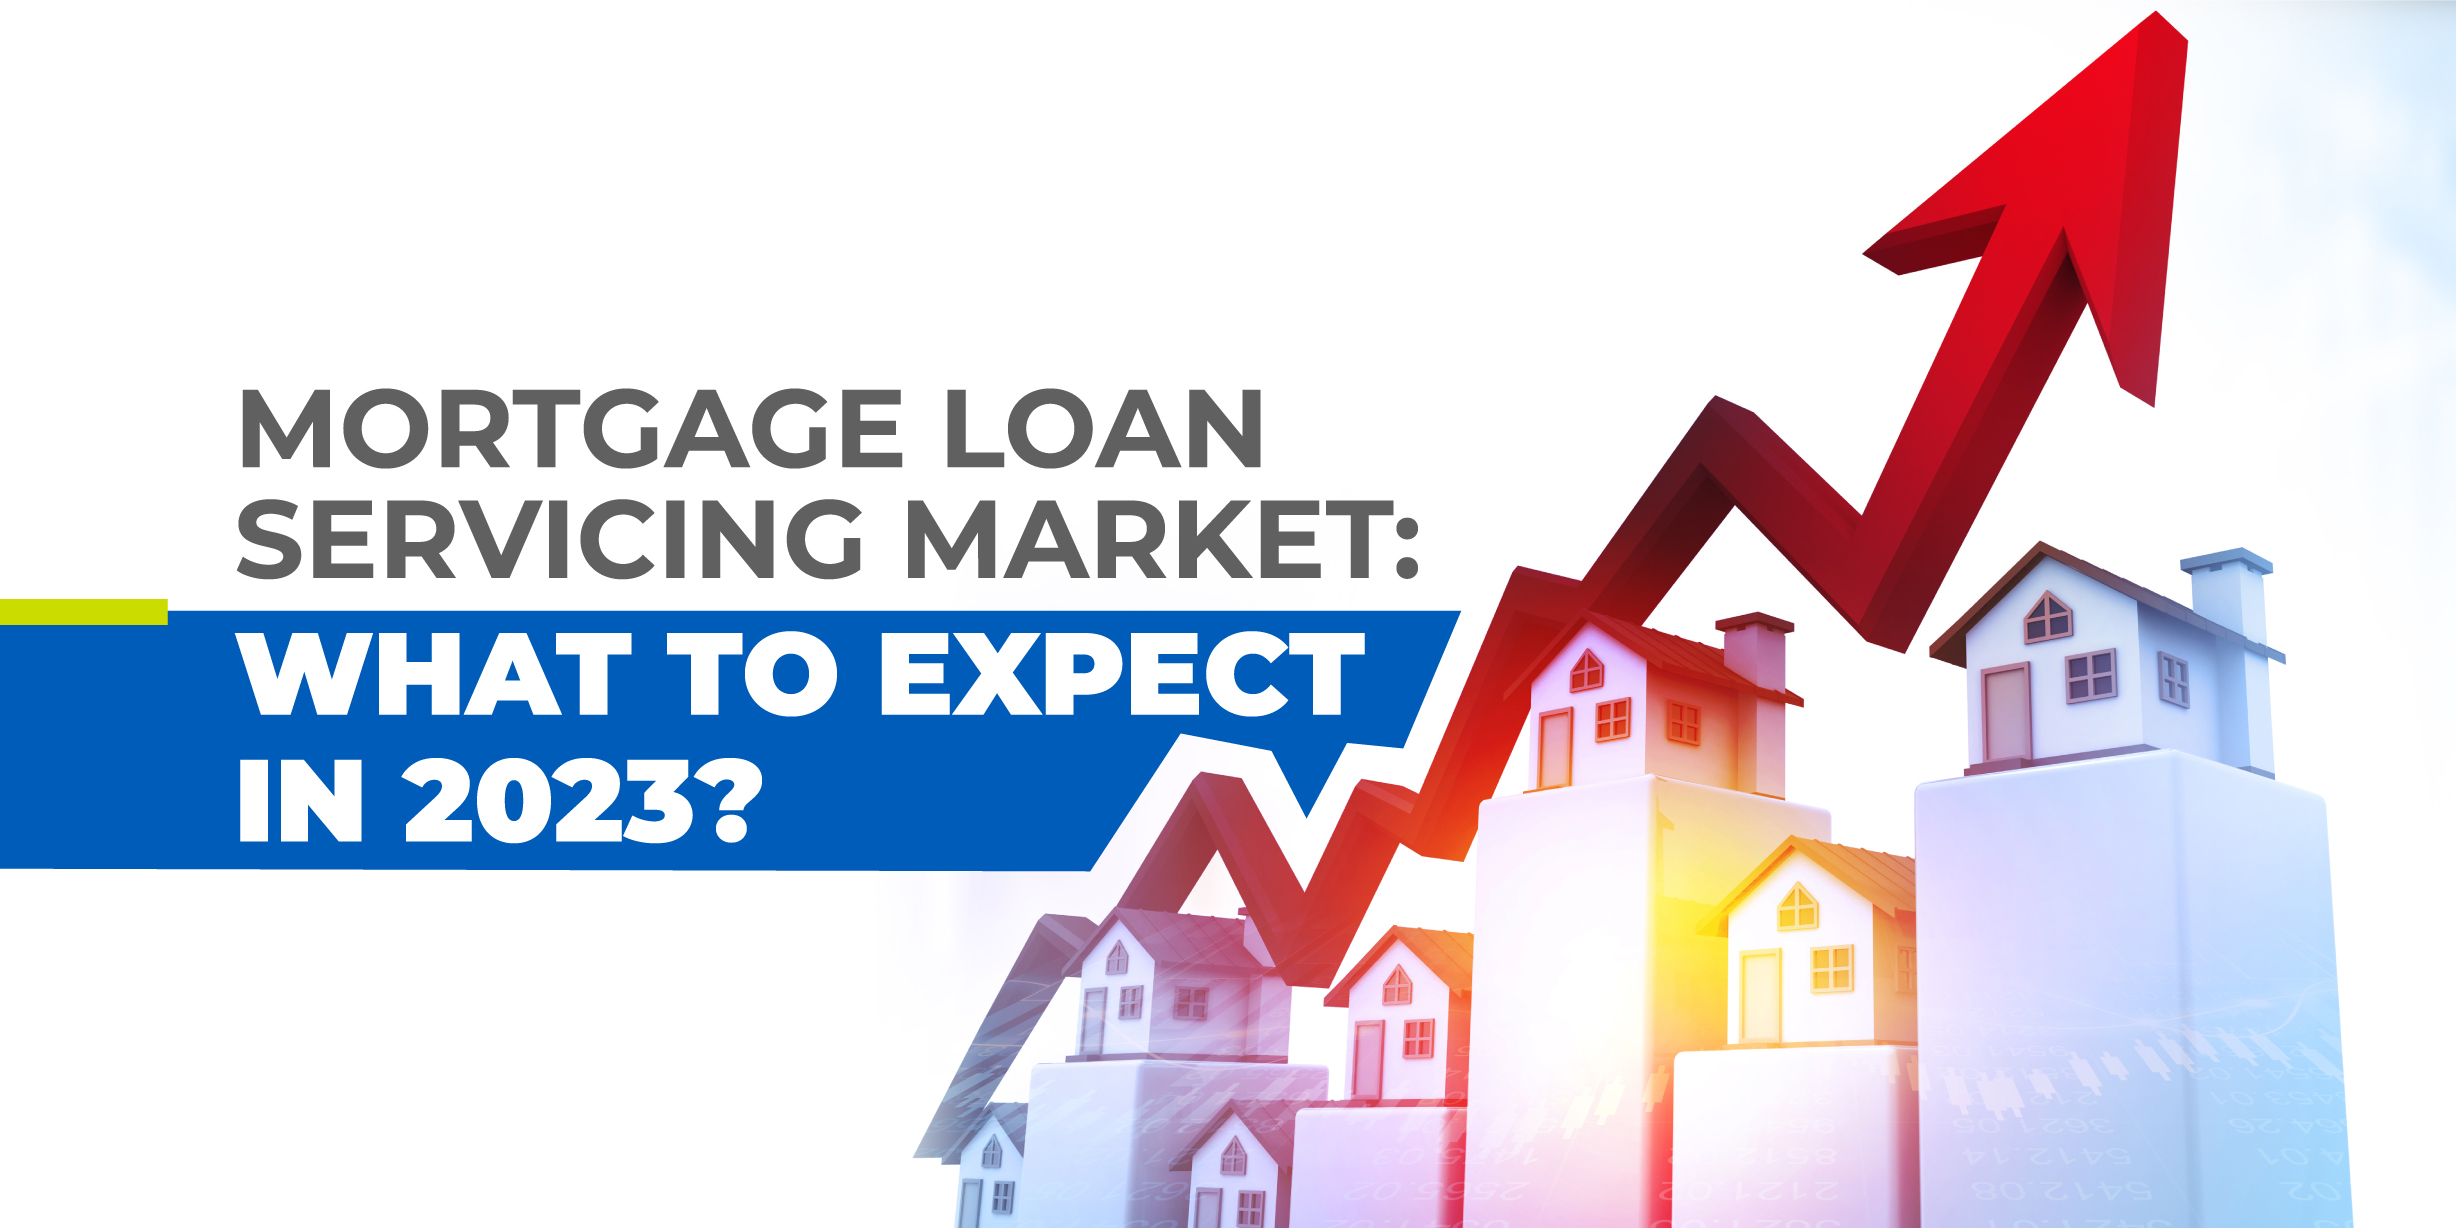 Mortgage Loan Servicing Market: What to Expect in 2023?